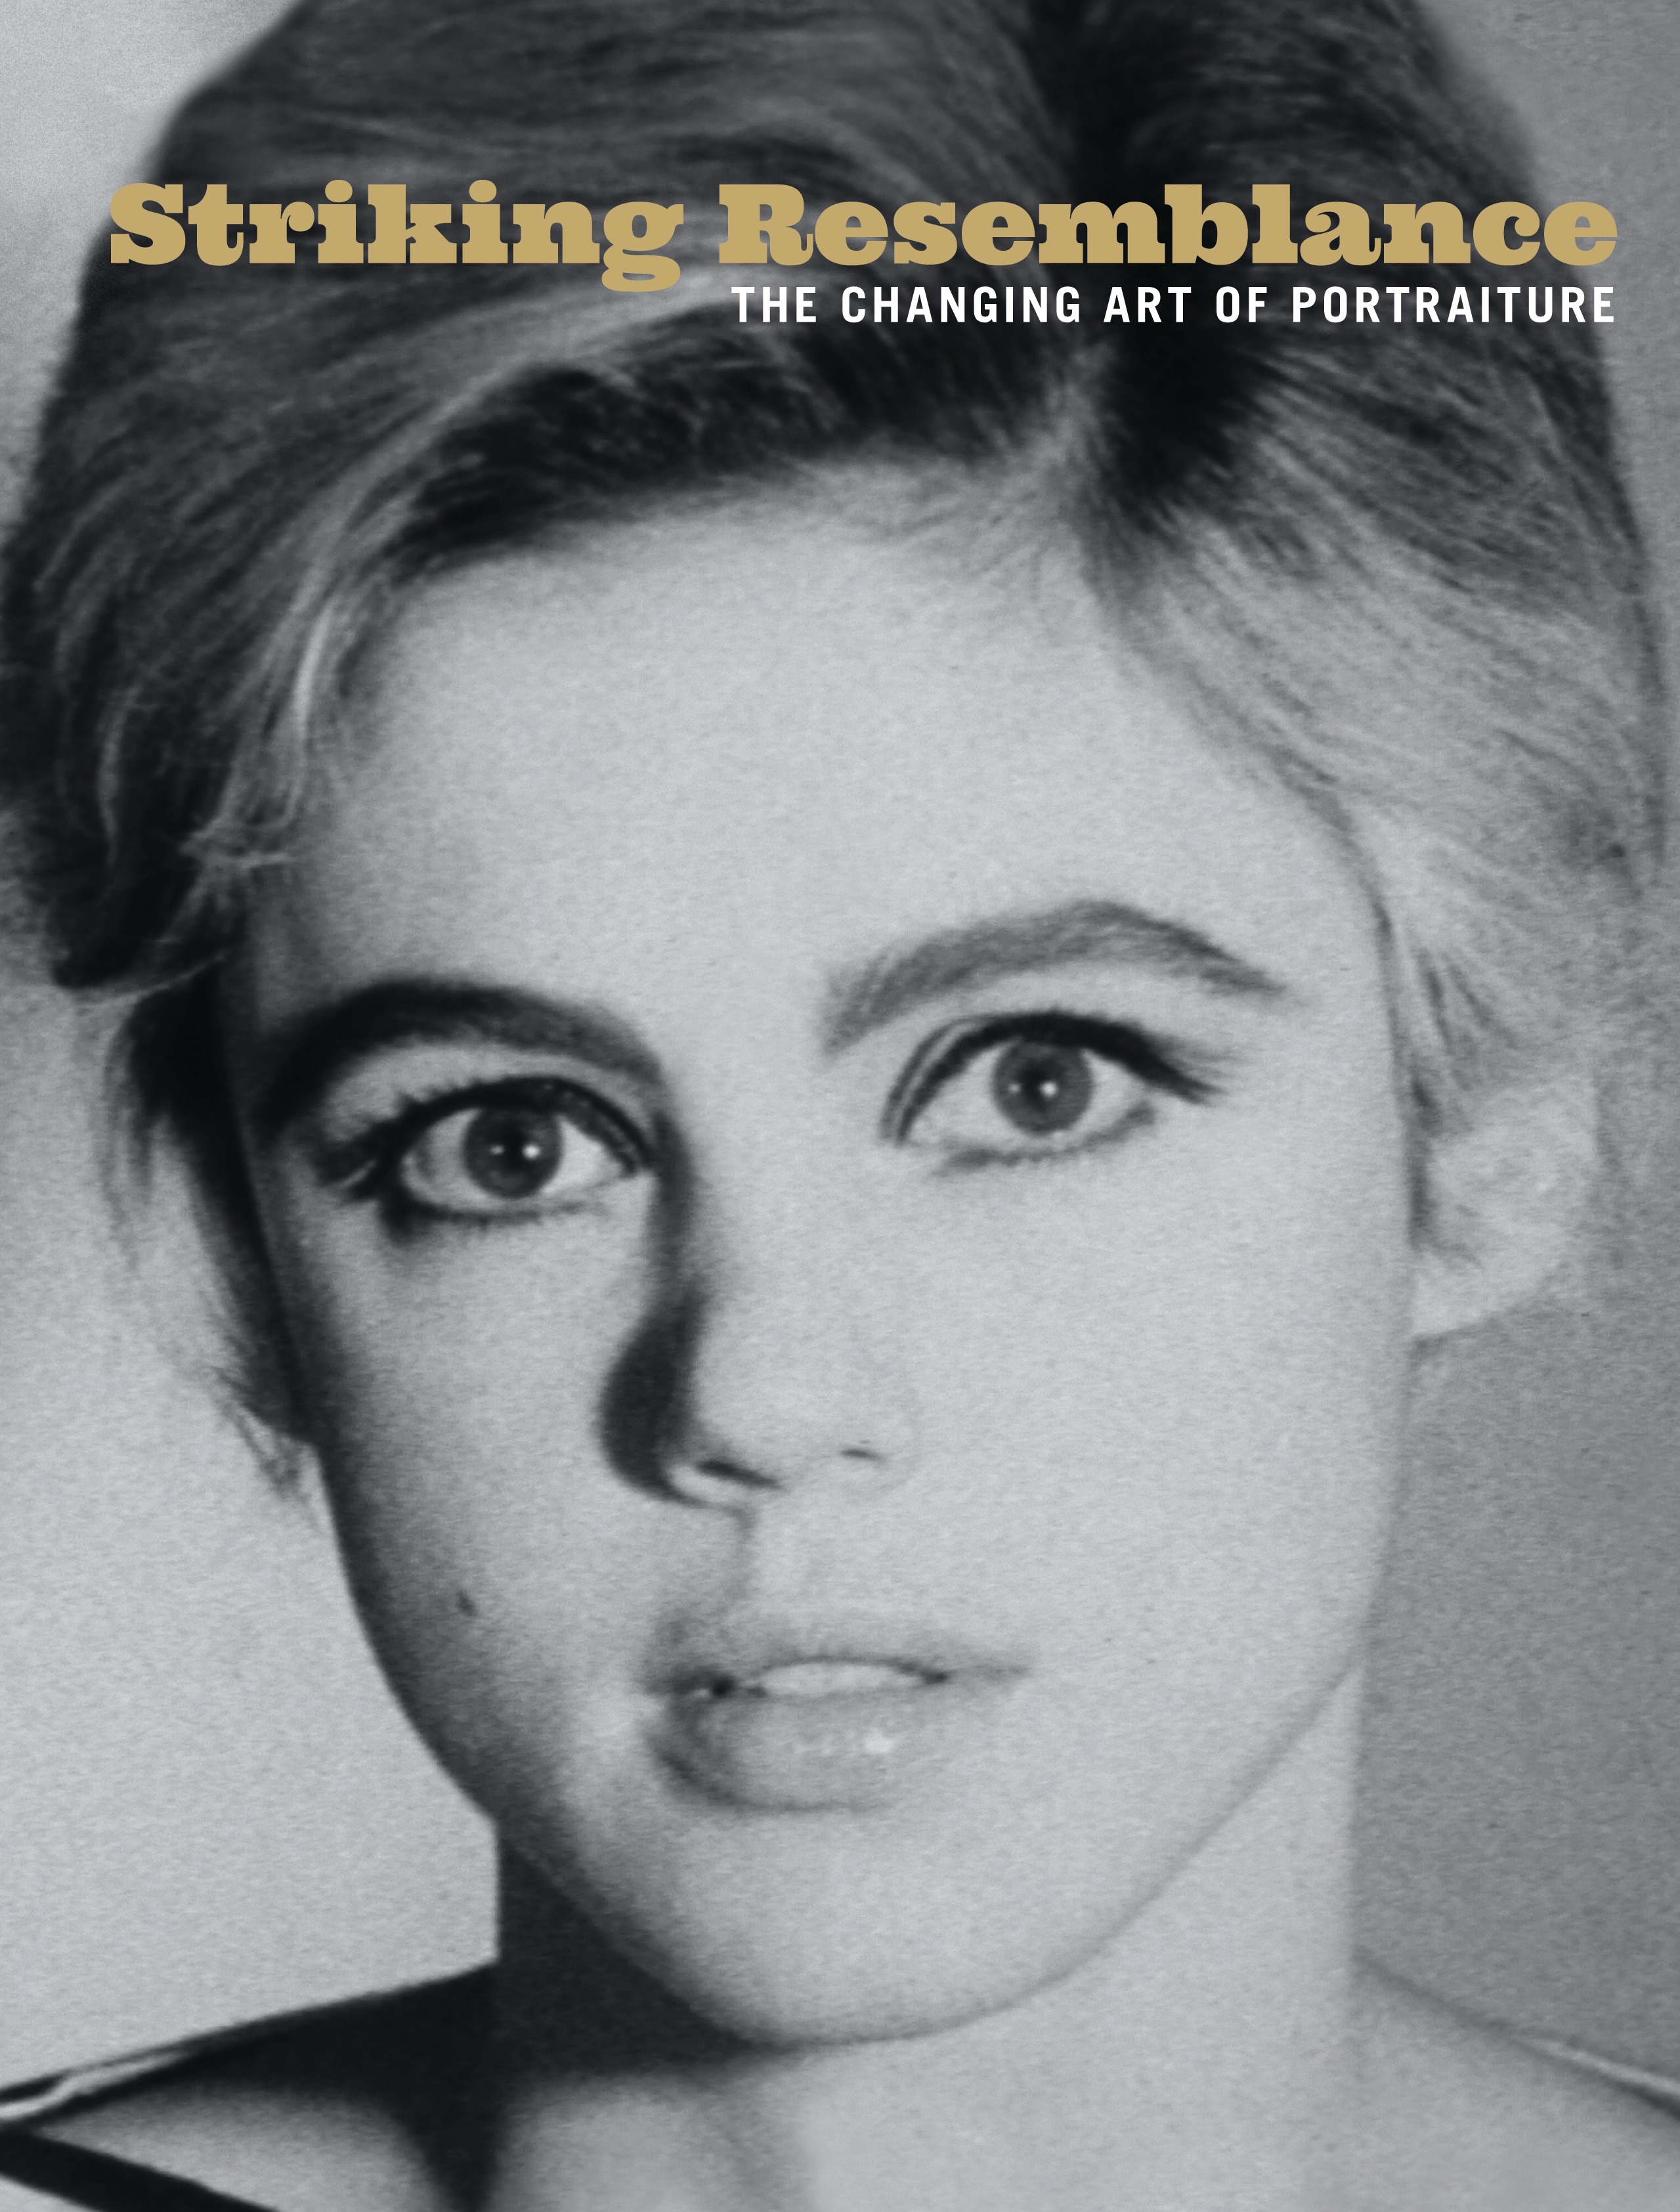 'Striking Resemblance. The Changing Art of Portraiture' by Donna Gustafson and Susan Sidlauskas with contributions from Lee Siegel. Prestel, January 2014